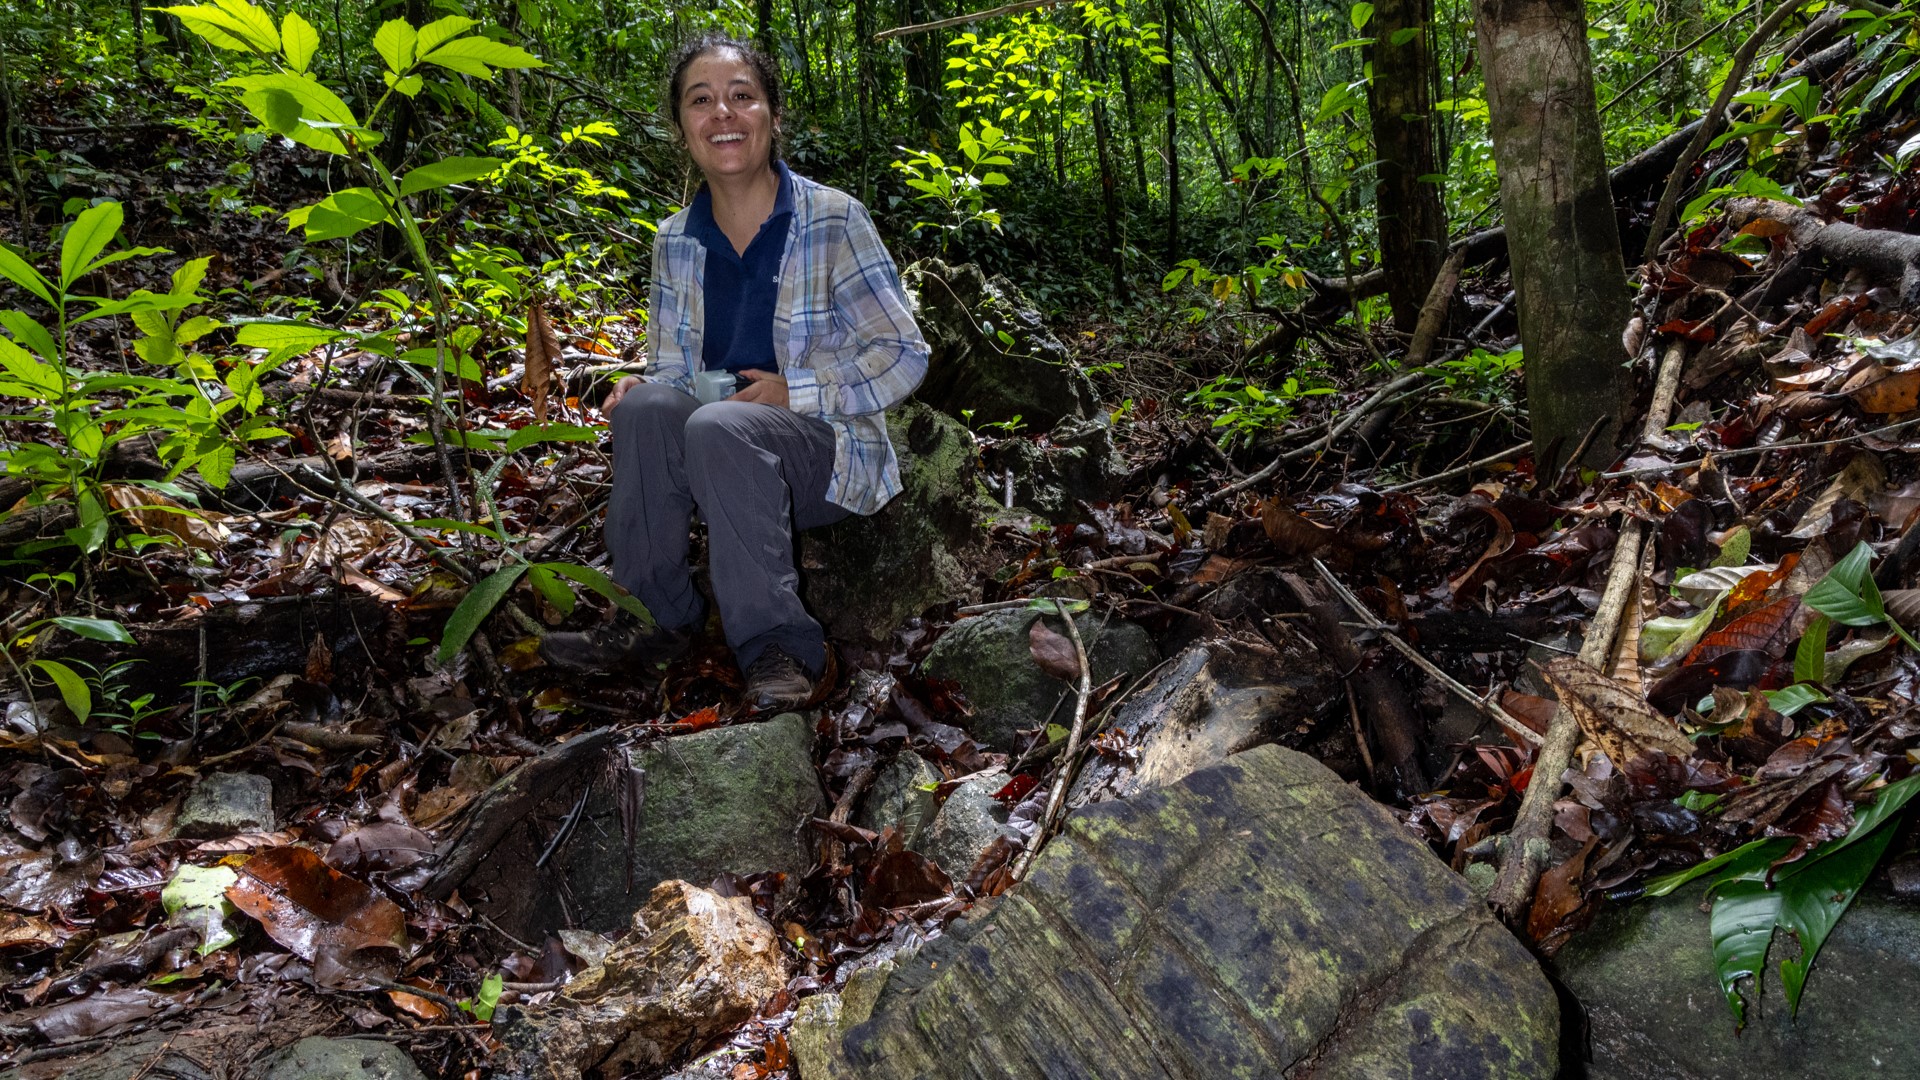 Researcher Camila Martínez Aguillón sits in the forest next to a fossilized wood sample.